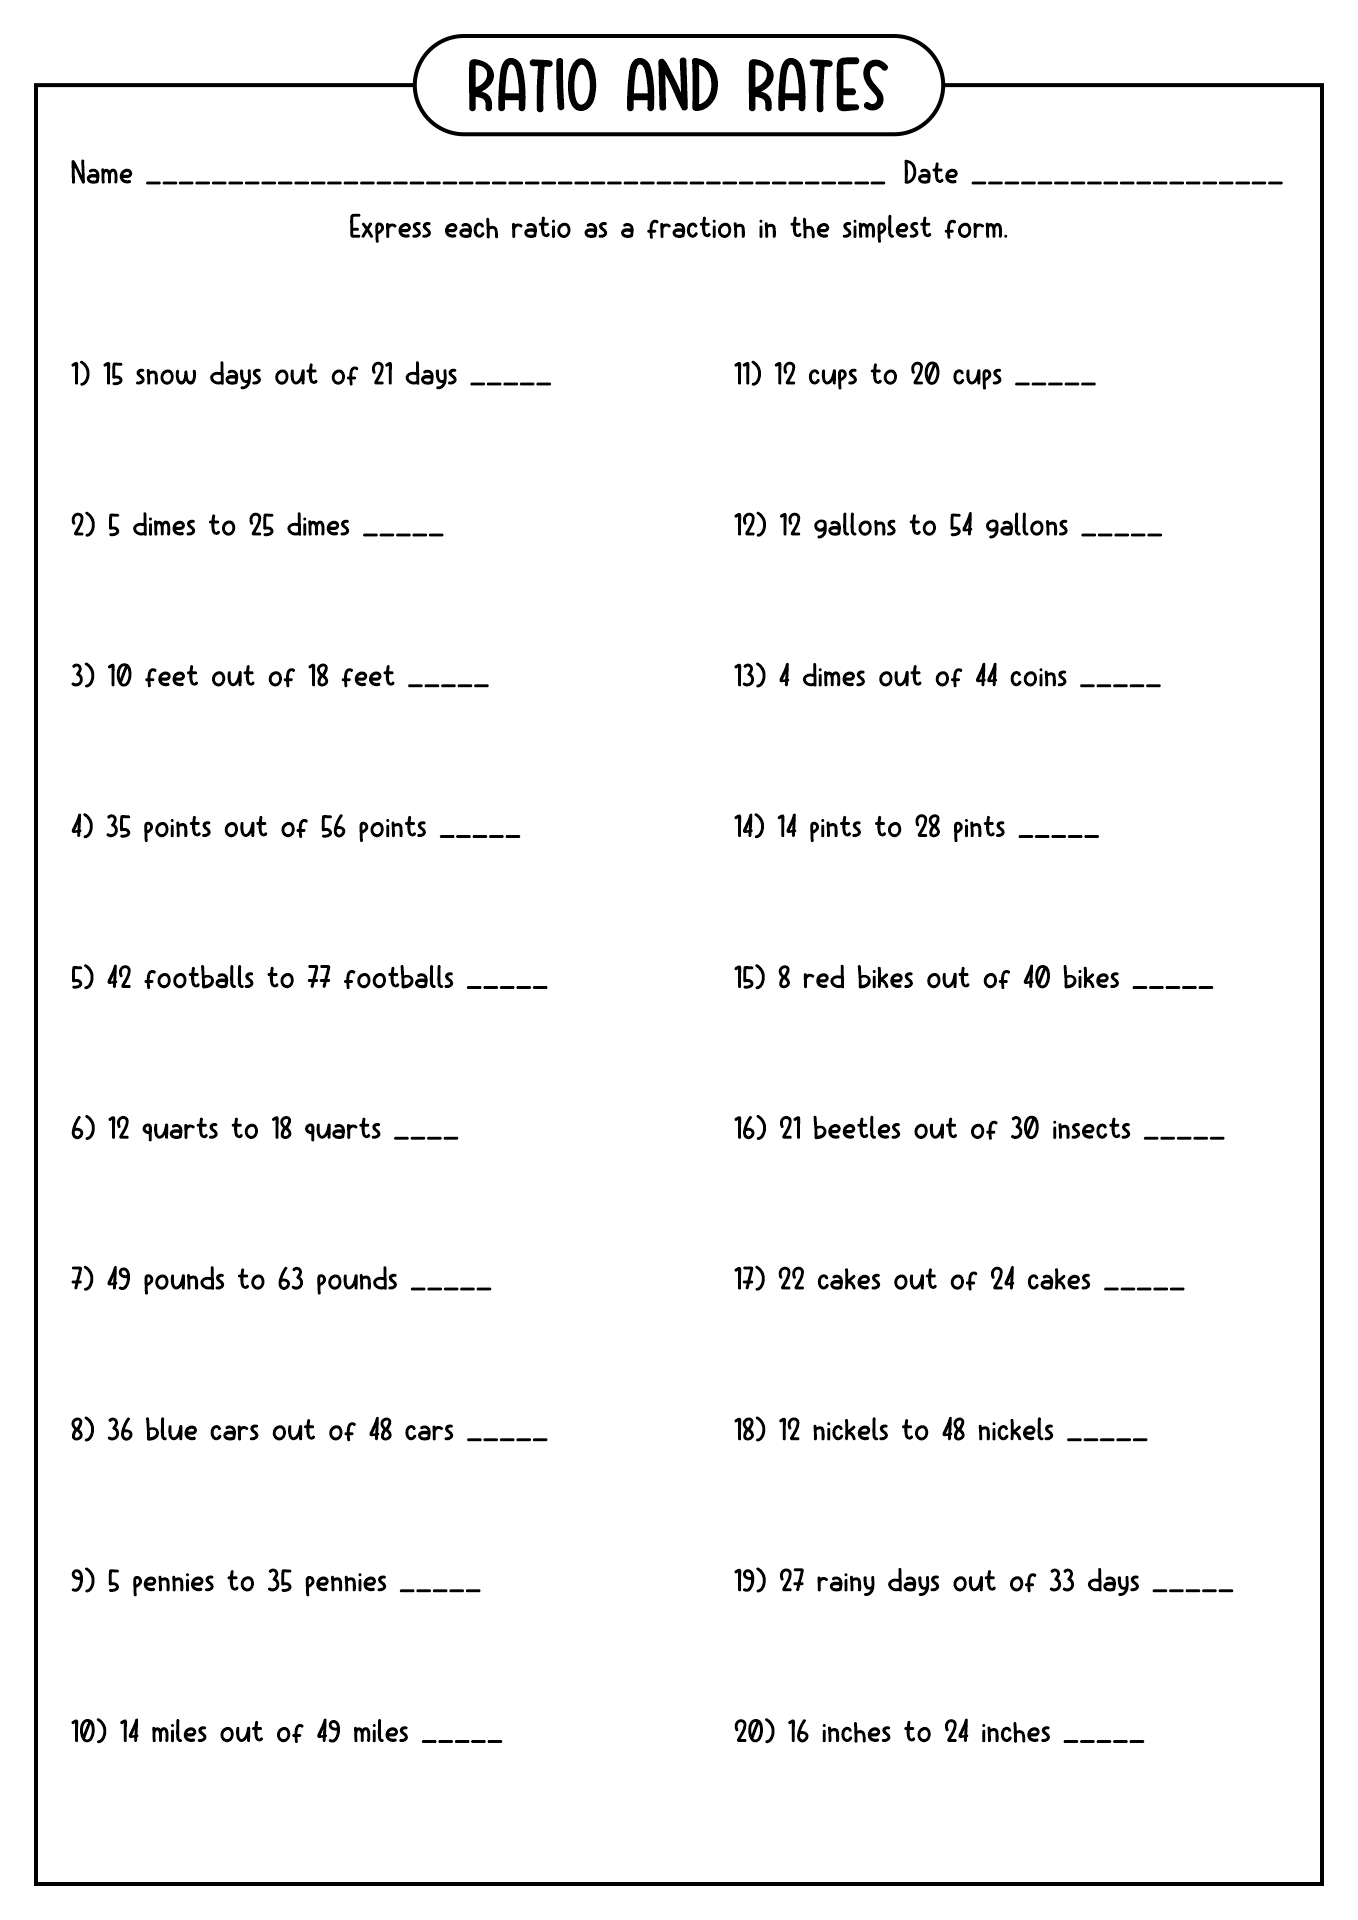 10-best-images-of-proportion-problems-worksheet-6th-grade-ratio-worksheets-unit-rate-word